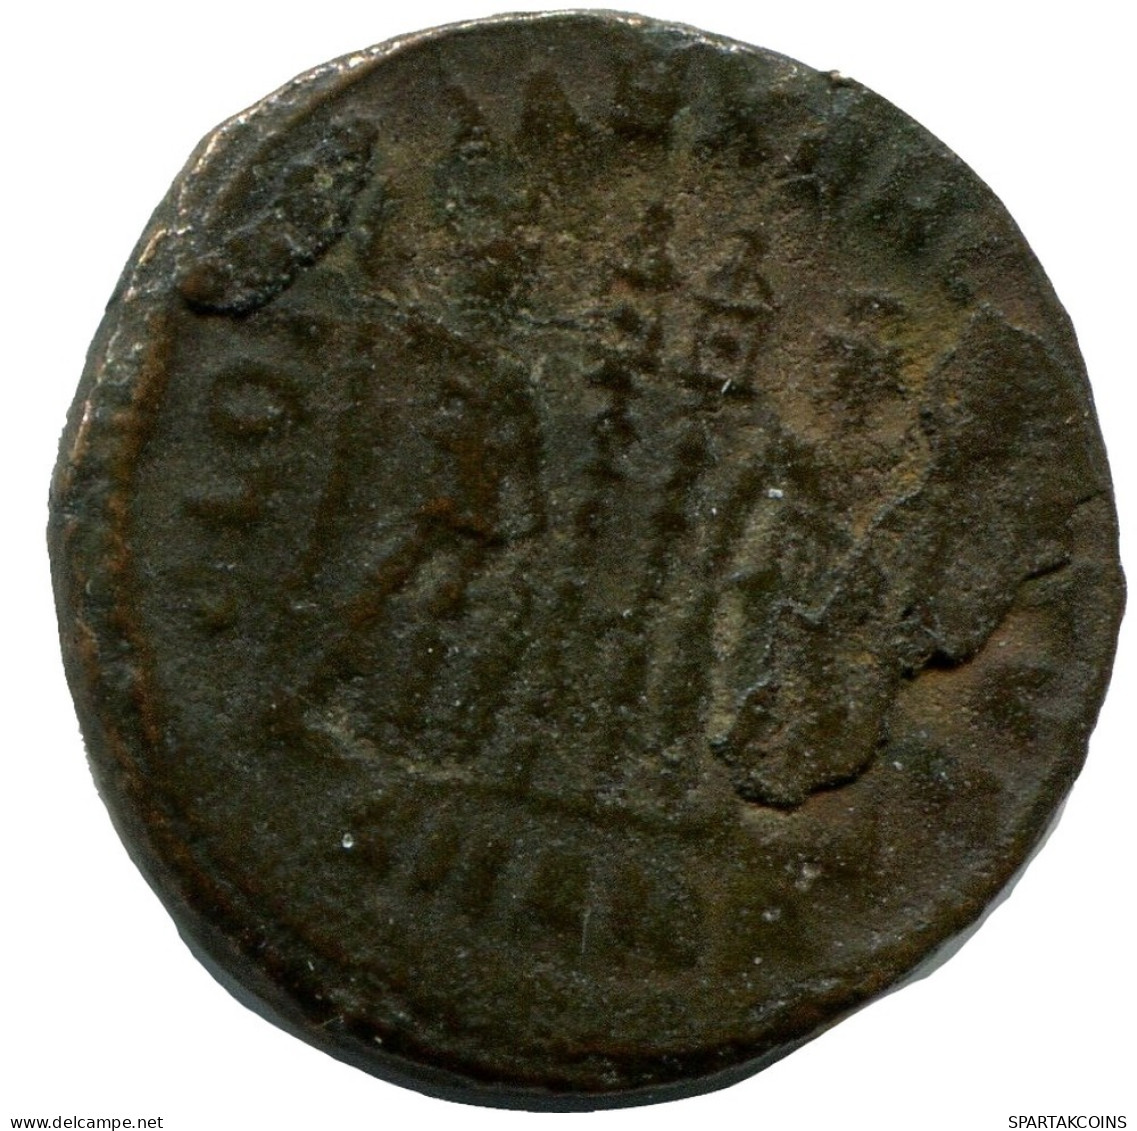 CONSTANTINE I MINTED IN ANTIOCH FOUND IN IHNASYAH HOARD EGYPT #ANC10623.14.D.A - The Christian Empire (307 AD To 363 AD)